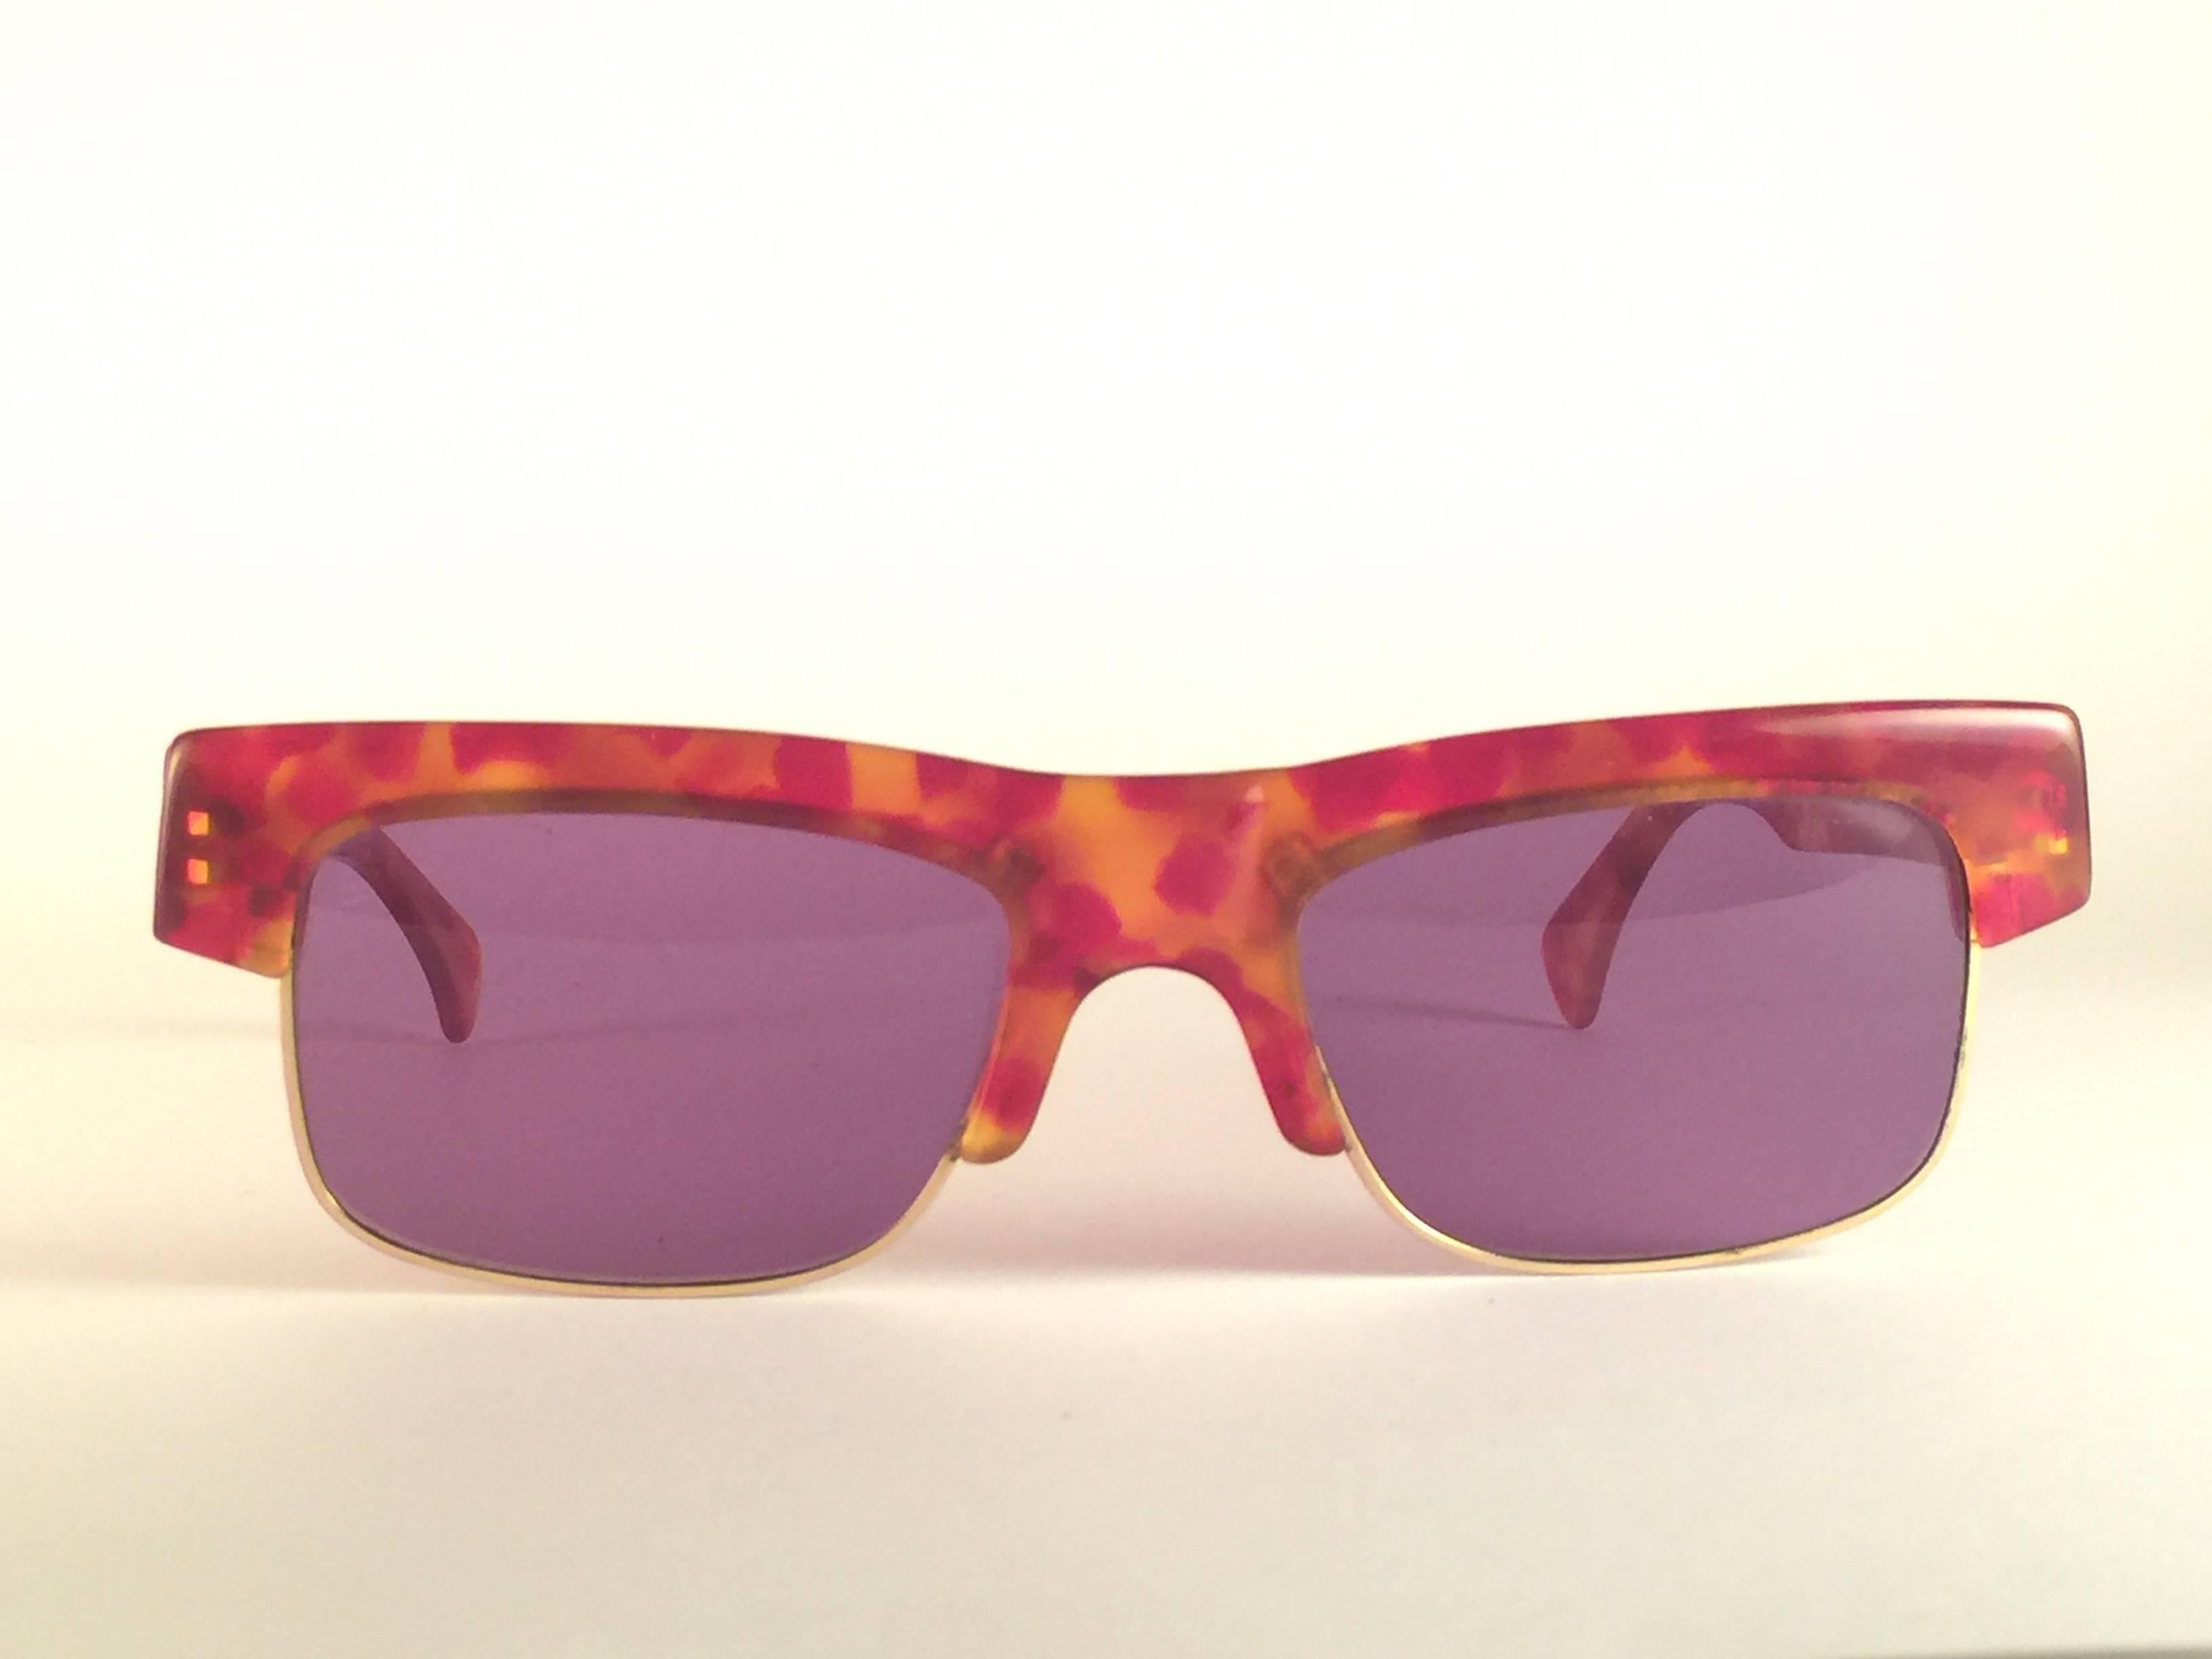 New Vintage Alain Mikli in Tortoise with gold accents frame.

Rare item in new and unworn condition. Spotless purple lenses.

Please consider that this item is nearly 40 years old so it could show minor sign of wear due to storage.

Comes with its